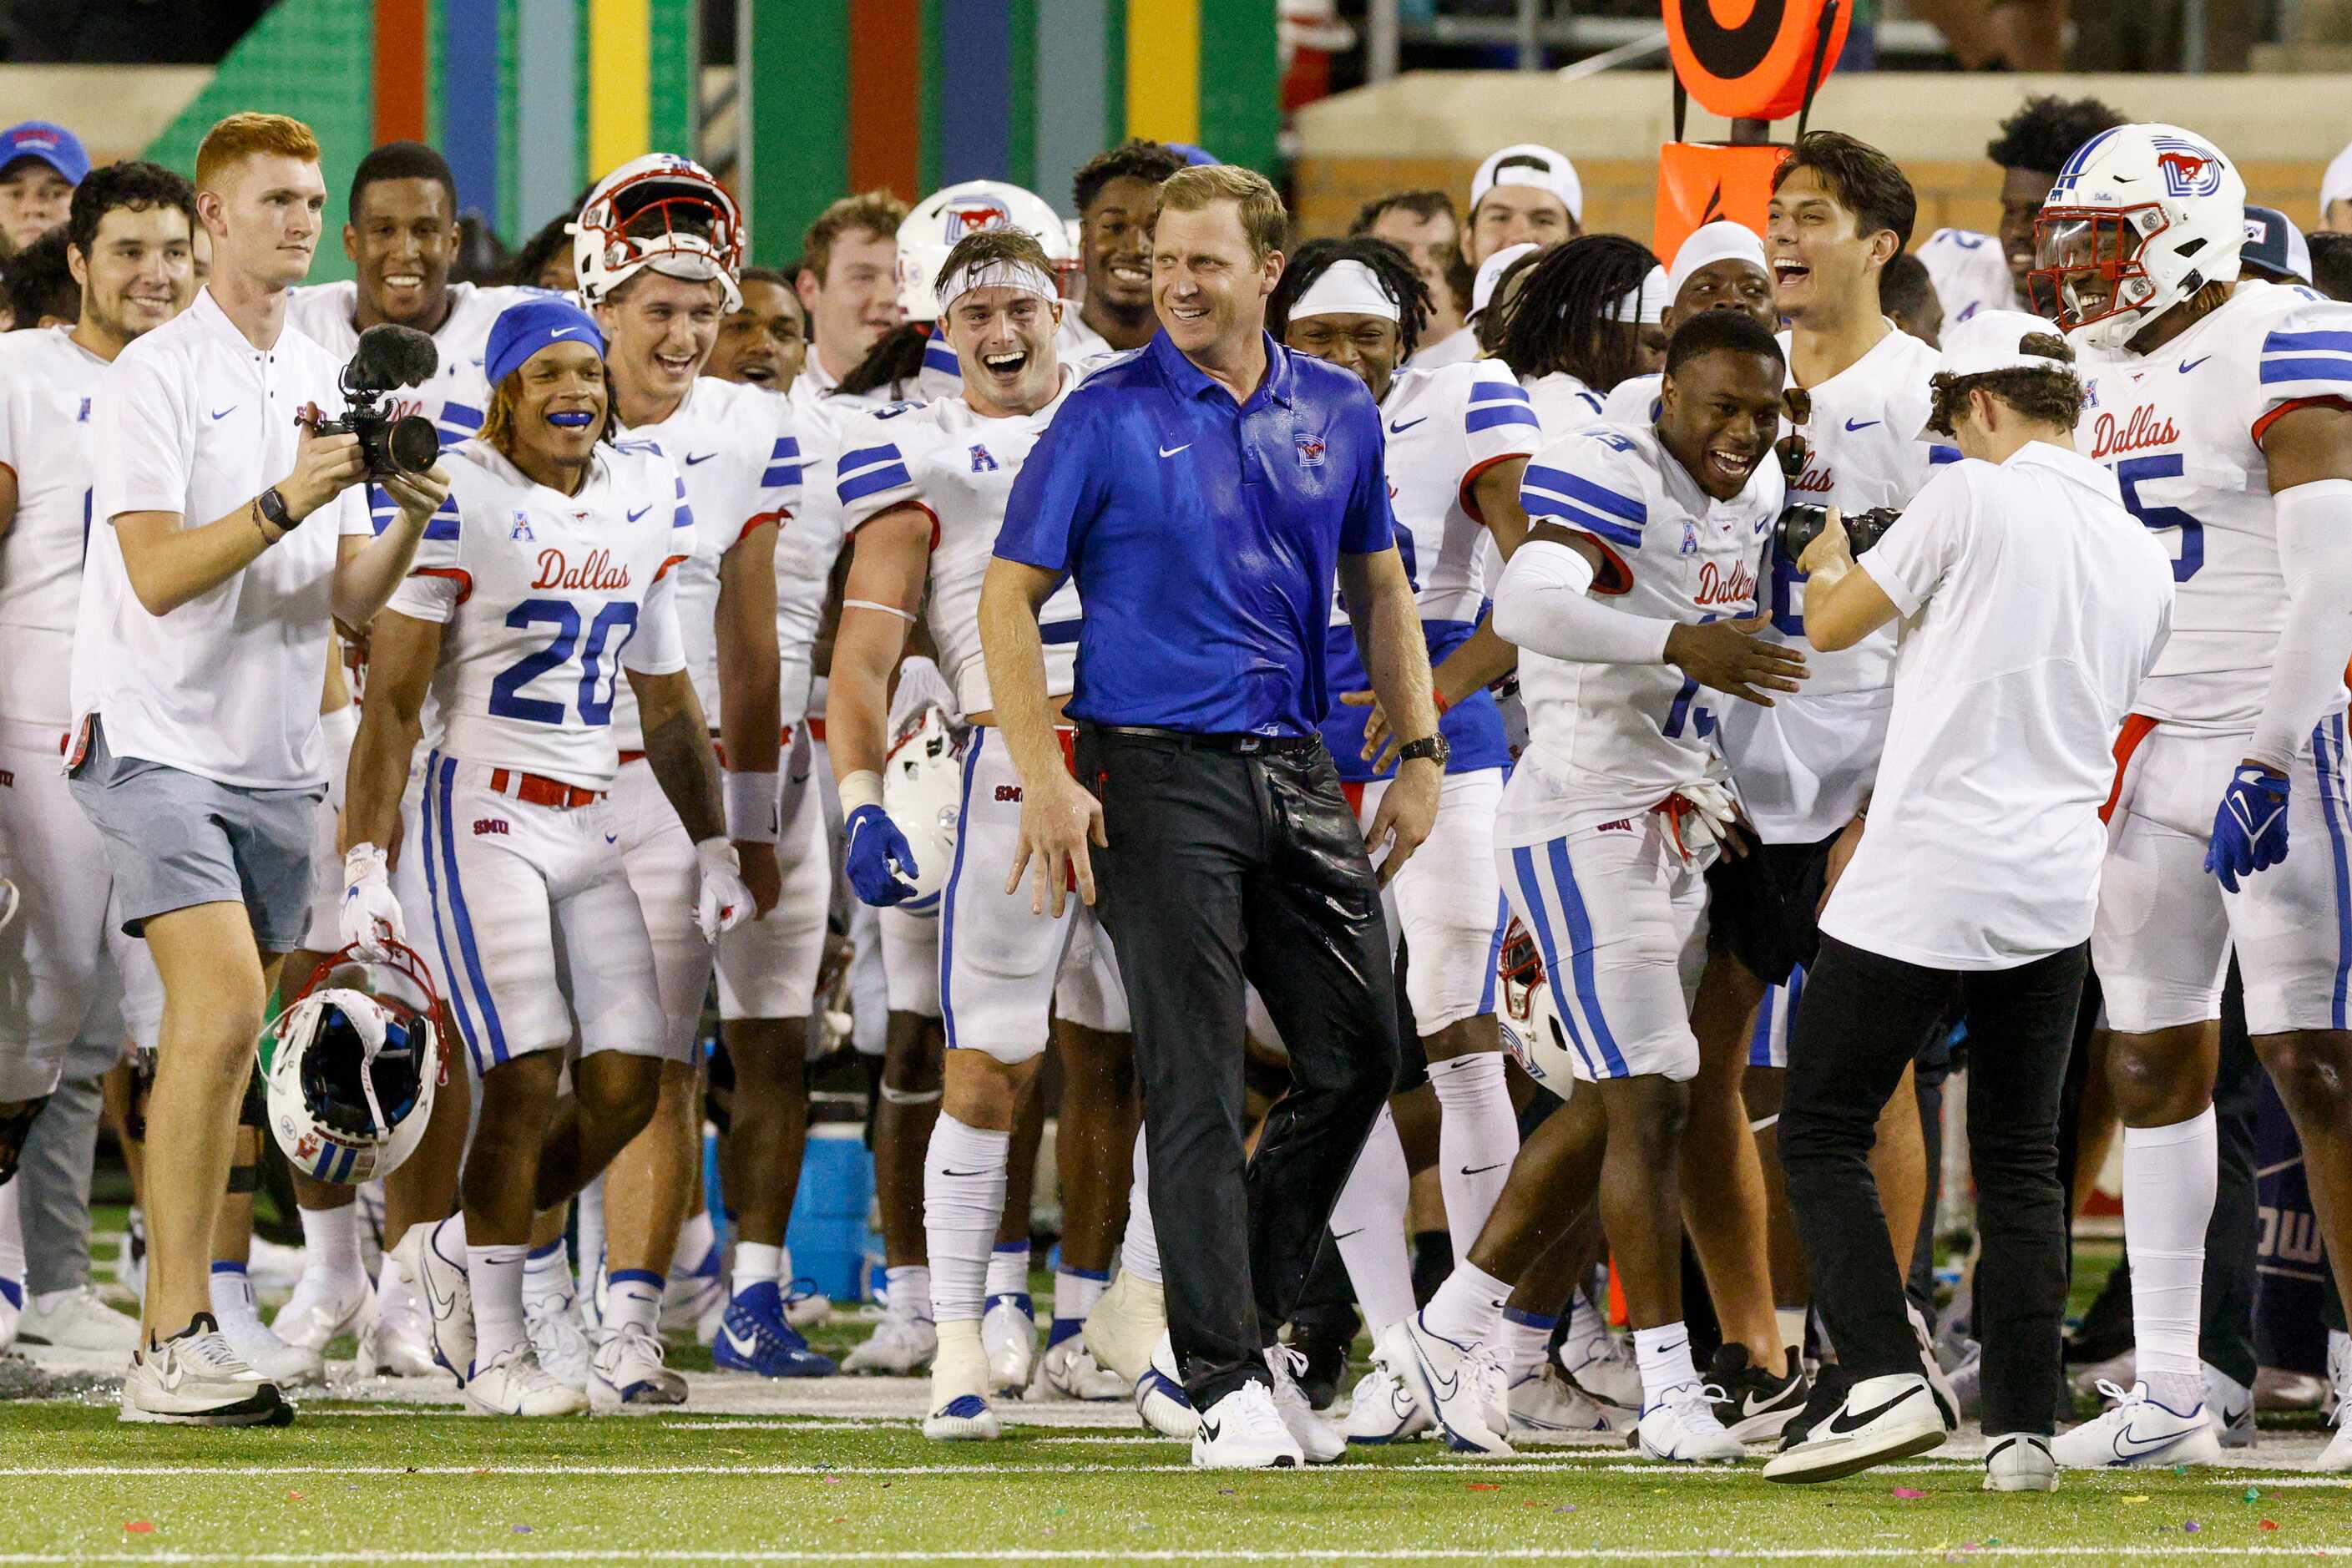 SMU head coach Rhett Lashlee smiles after being doused with ice water after a win against...